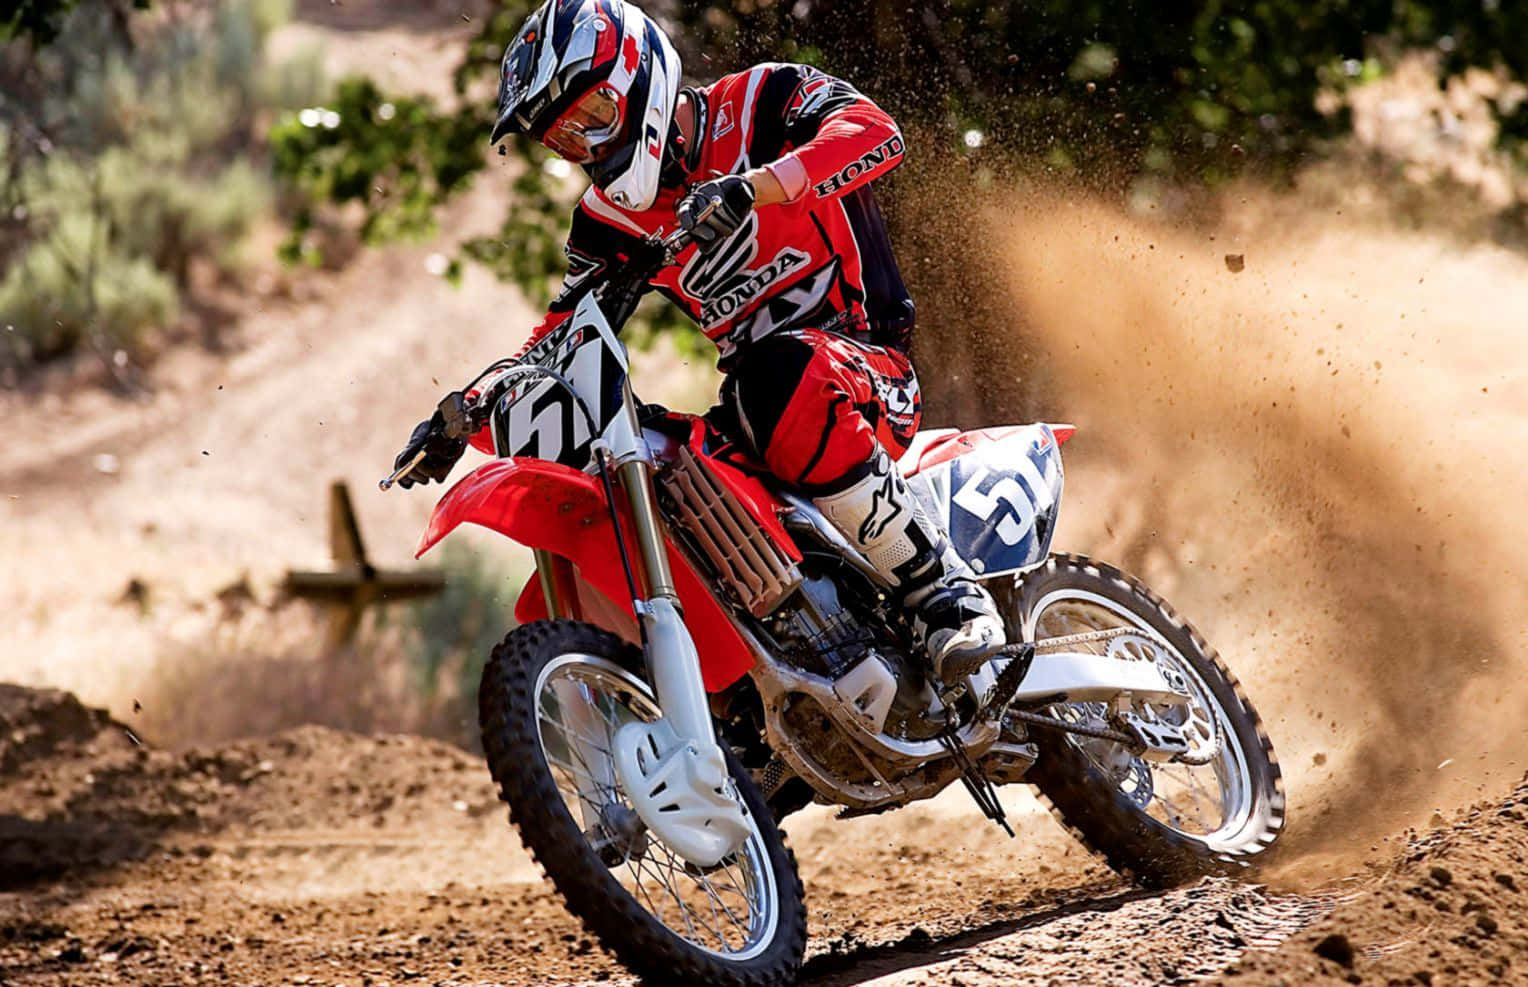 Unleash your inner passion and explore the trails using a Honda Dirt Bike. Wallpaper